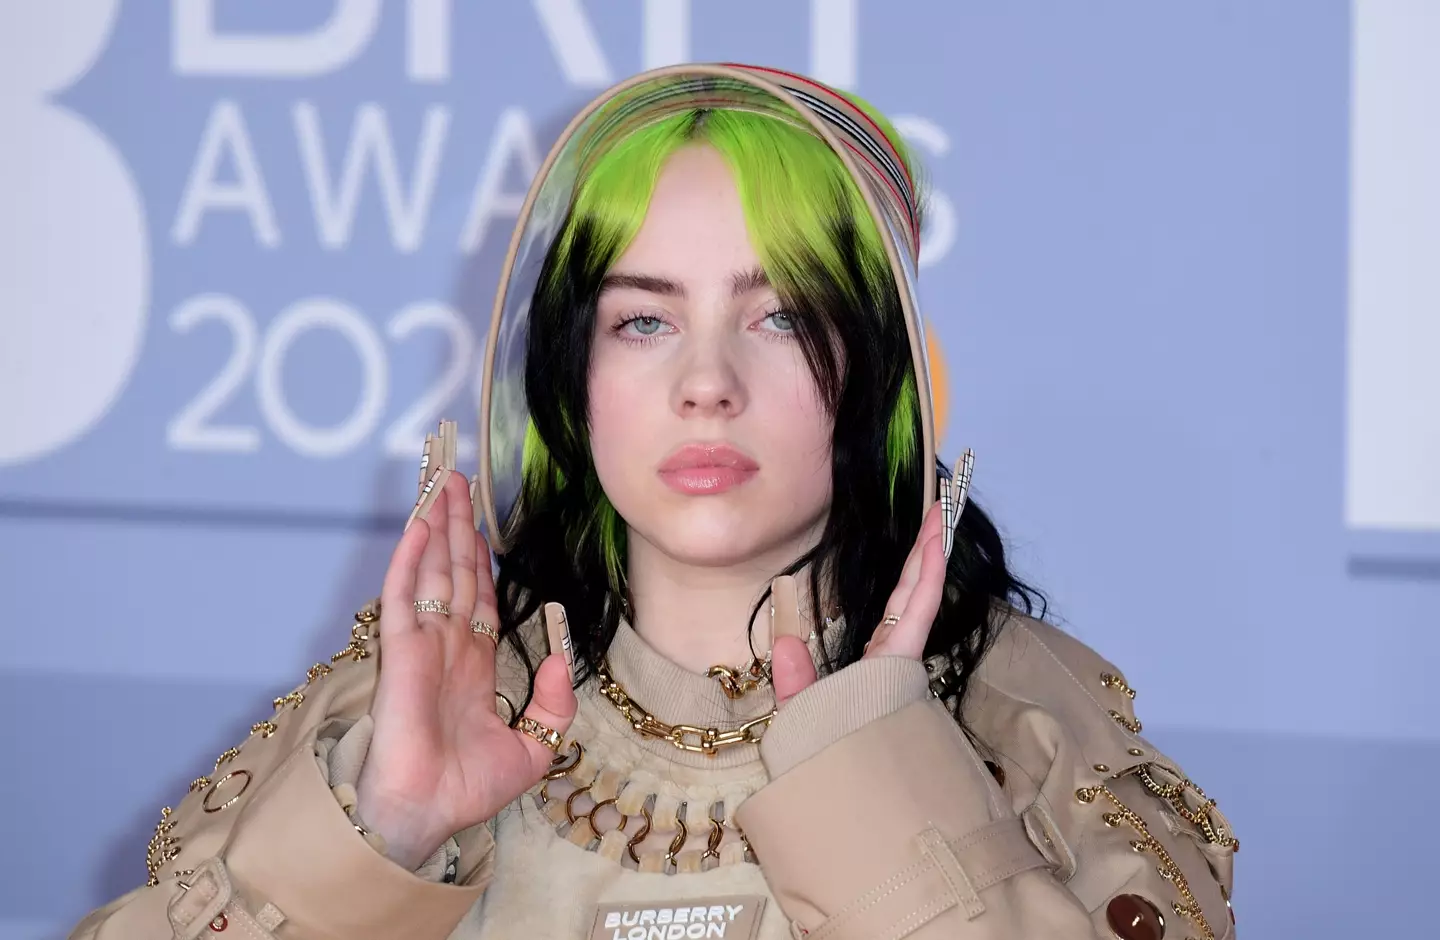 Billie Eilish once revealed that she has been 'scared' and 'terrified' of Eminem her 'whole life'.